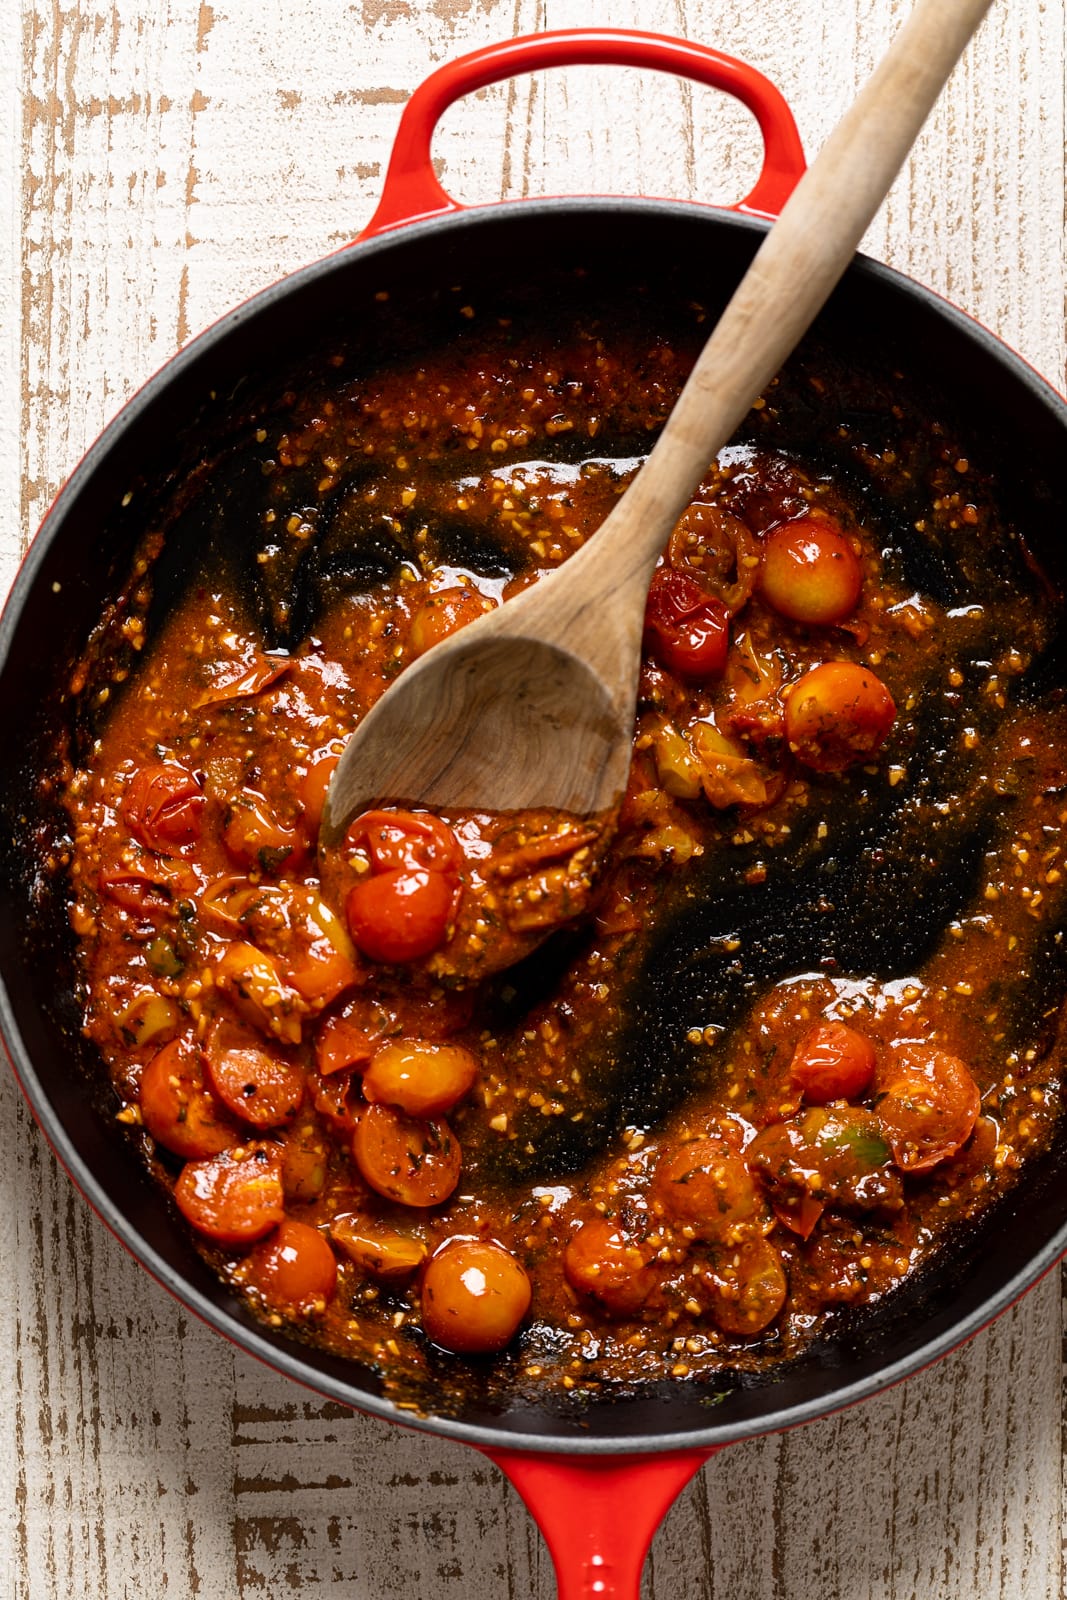 Wooden spoon stirring a skillet of tomatoes and flavorings